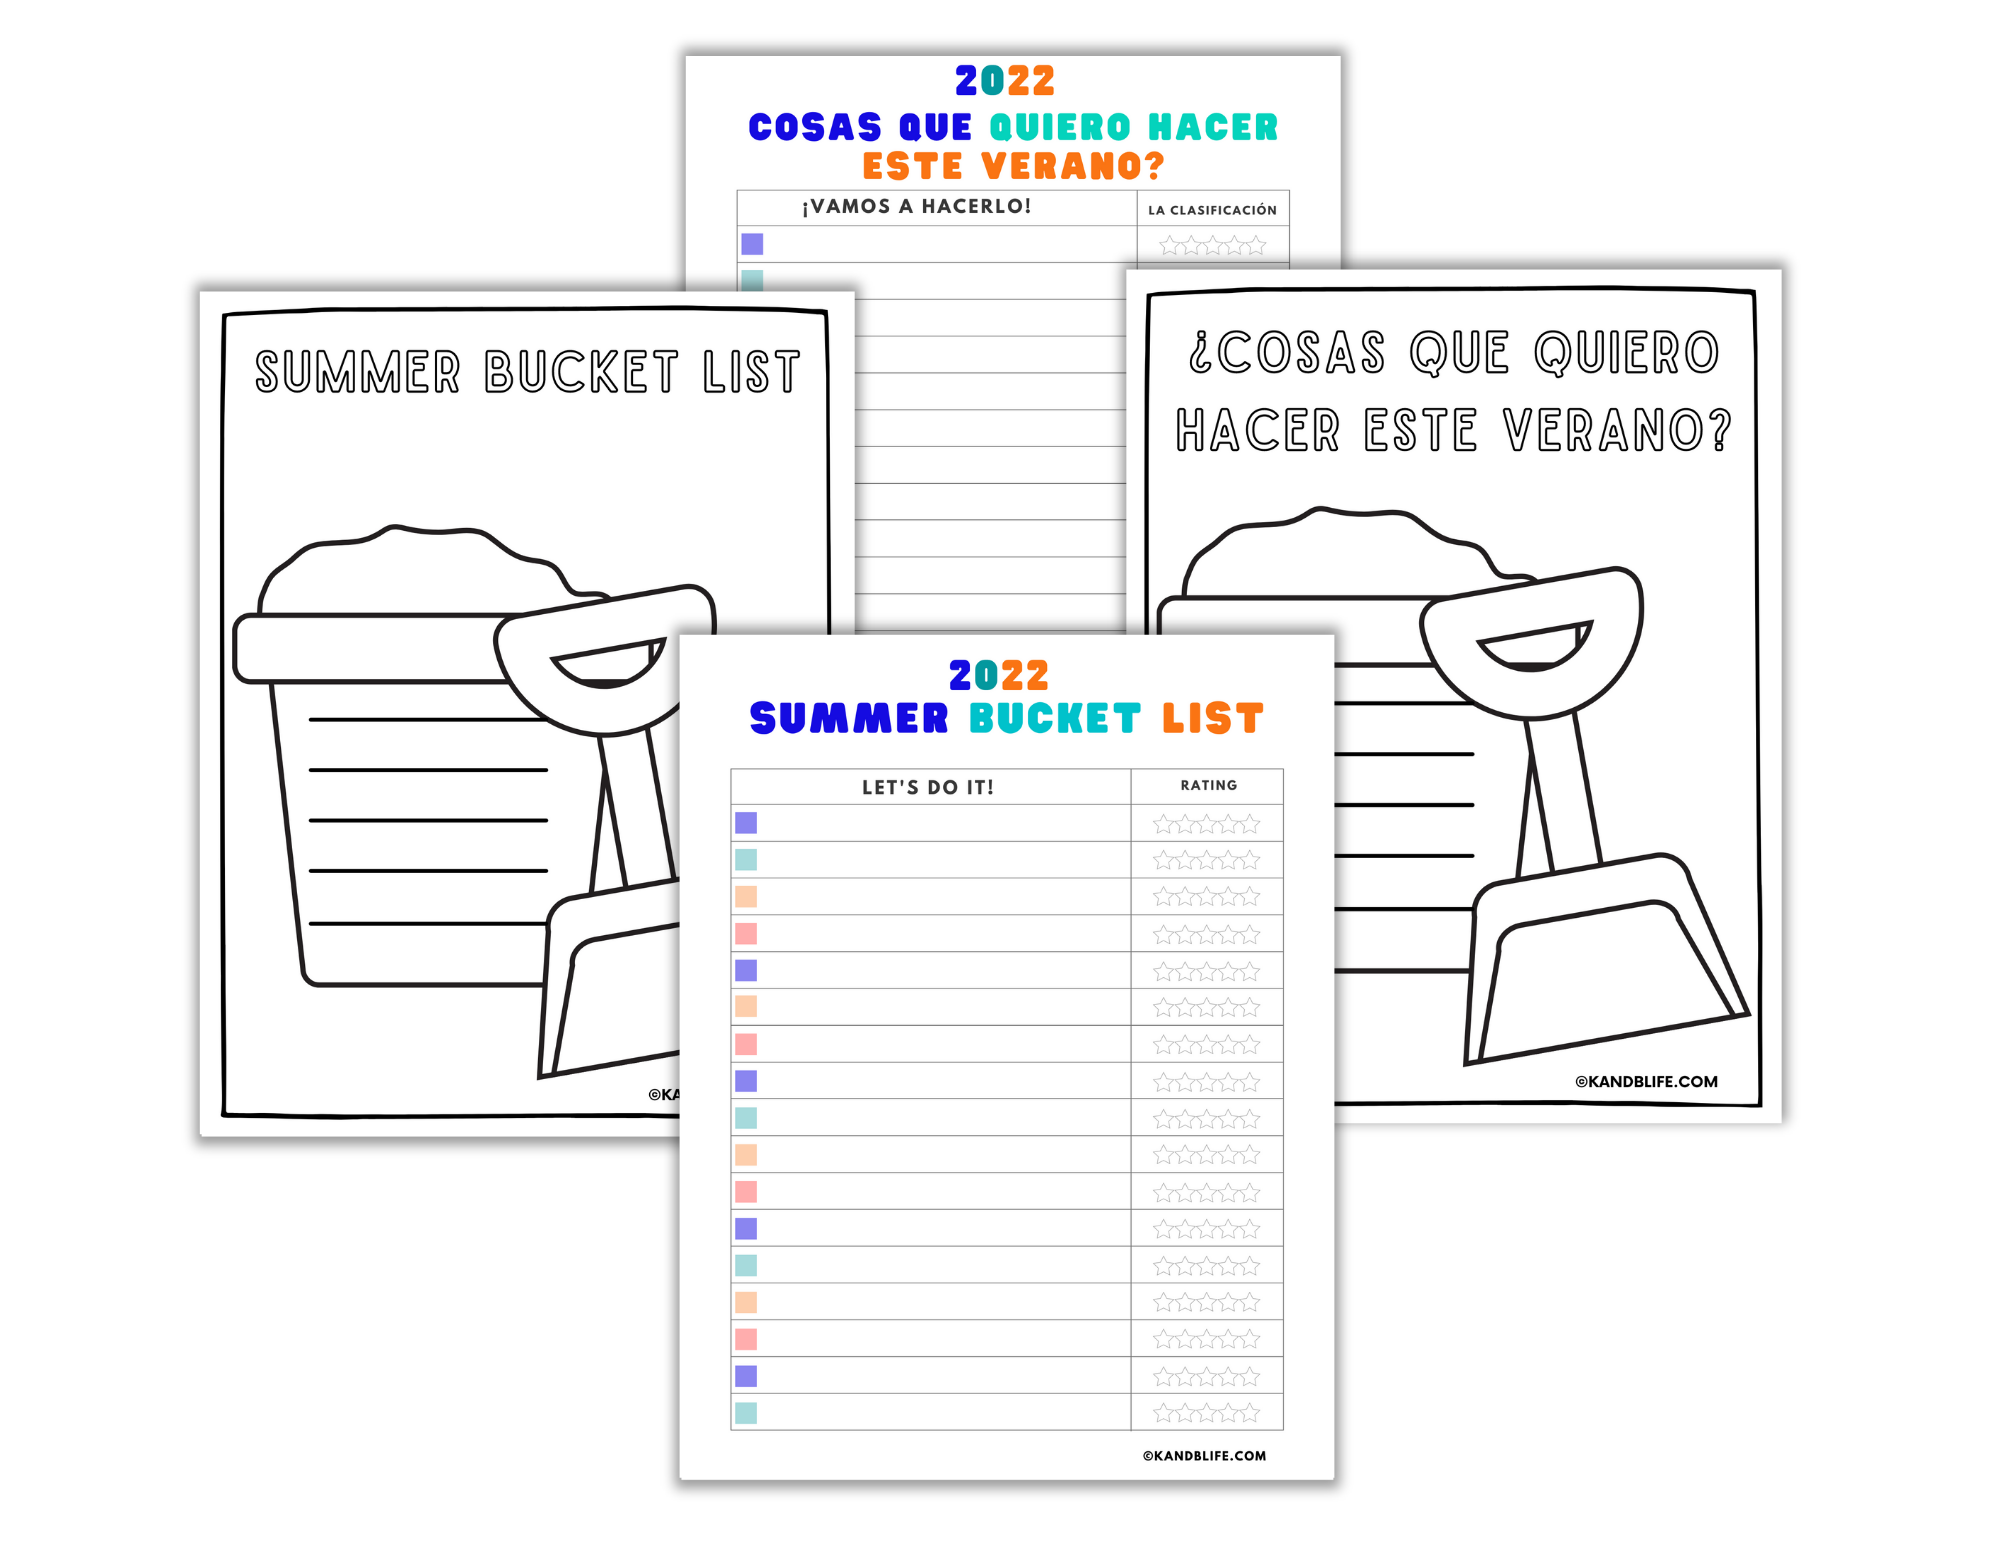 4 Summer Bucket Lists in English and Spanish.